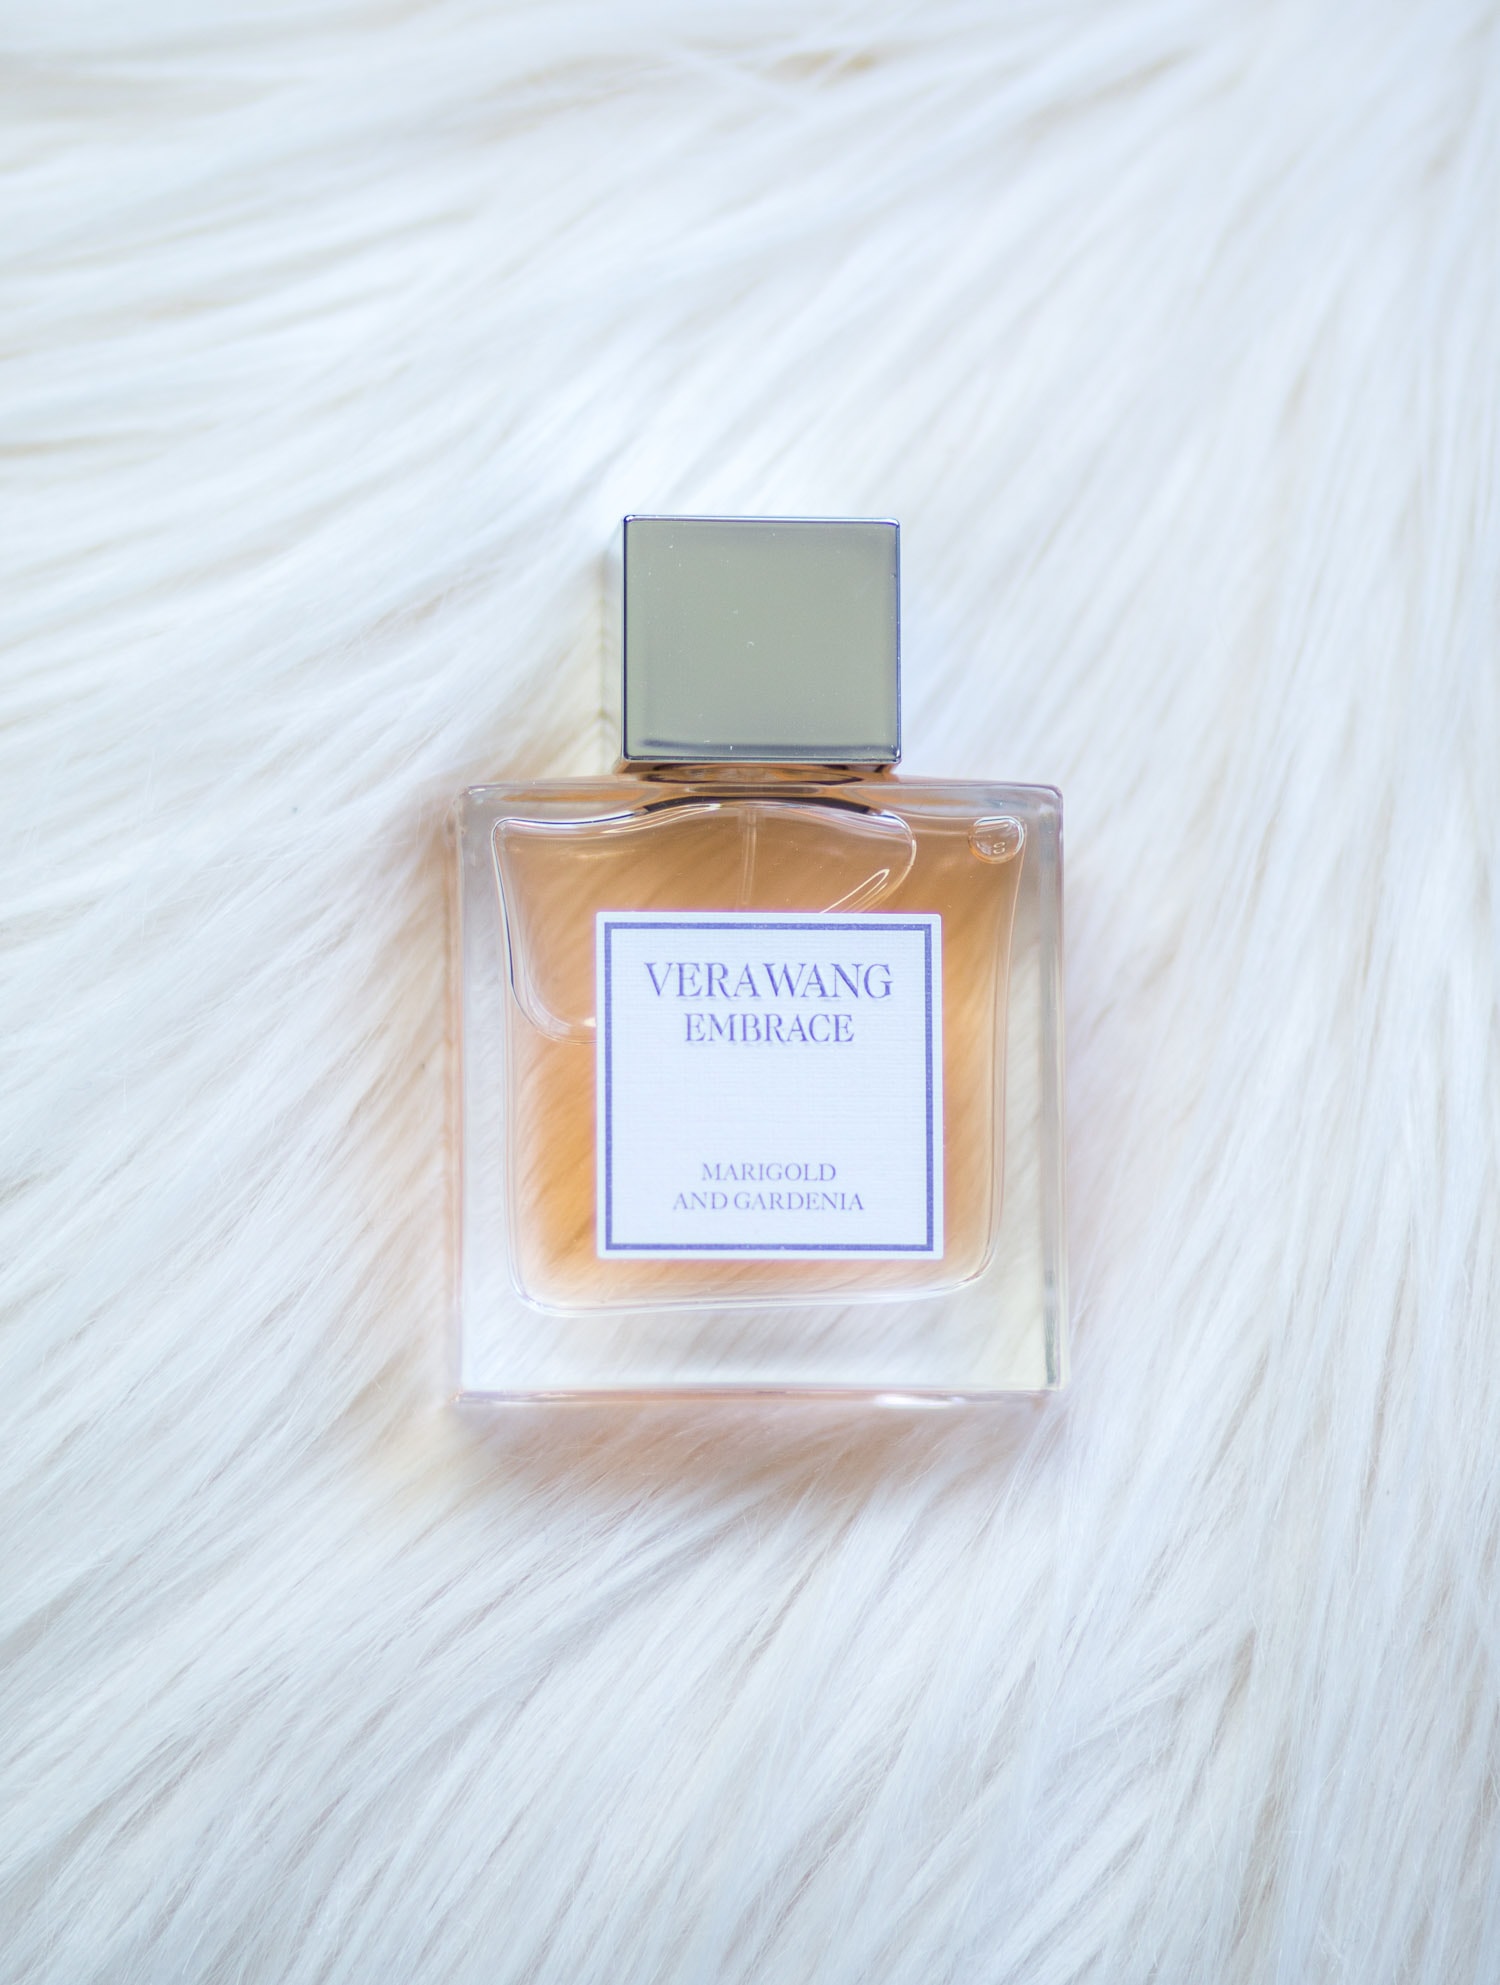 Looking for the perfect light floral fragrance? Ashley Brooke is sharing her thoughts on the Vera Wang Embrace Marigold and Gardenia perfume from Kohl's!